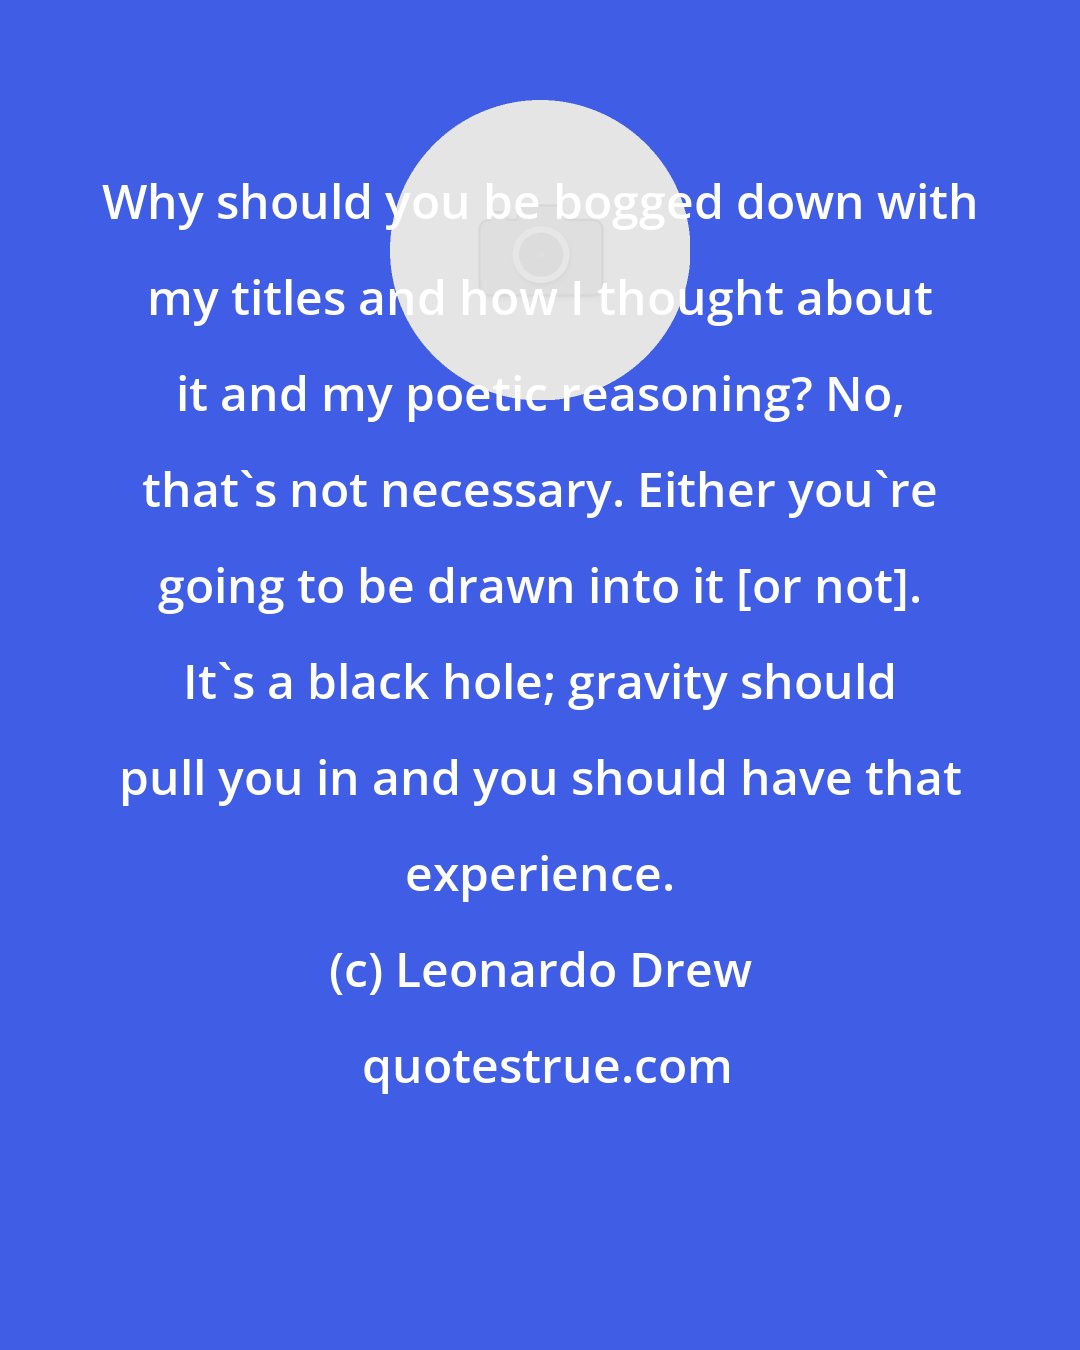 Leonardo Drew: Why should you be bogged down with my titles and how I thought about it and my poetic reasoning? No, that's not necessary. Either you're going to be drawn into it [or not]. It's a black hole; gravity should pull you in and you should have that experience.